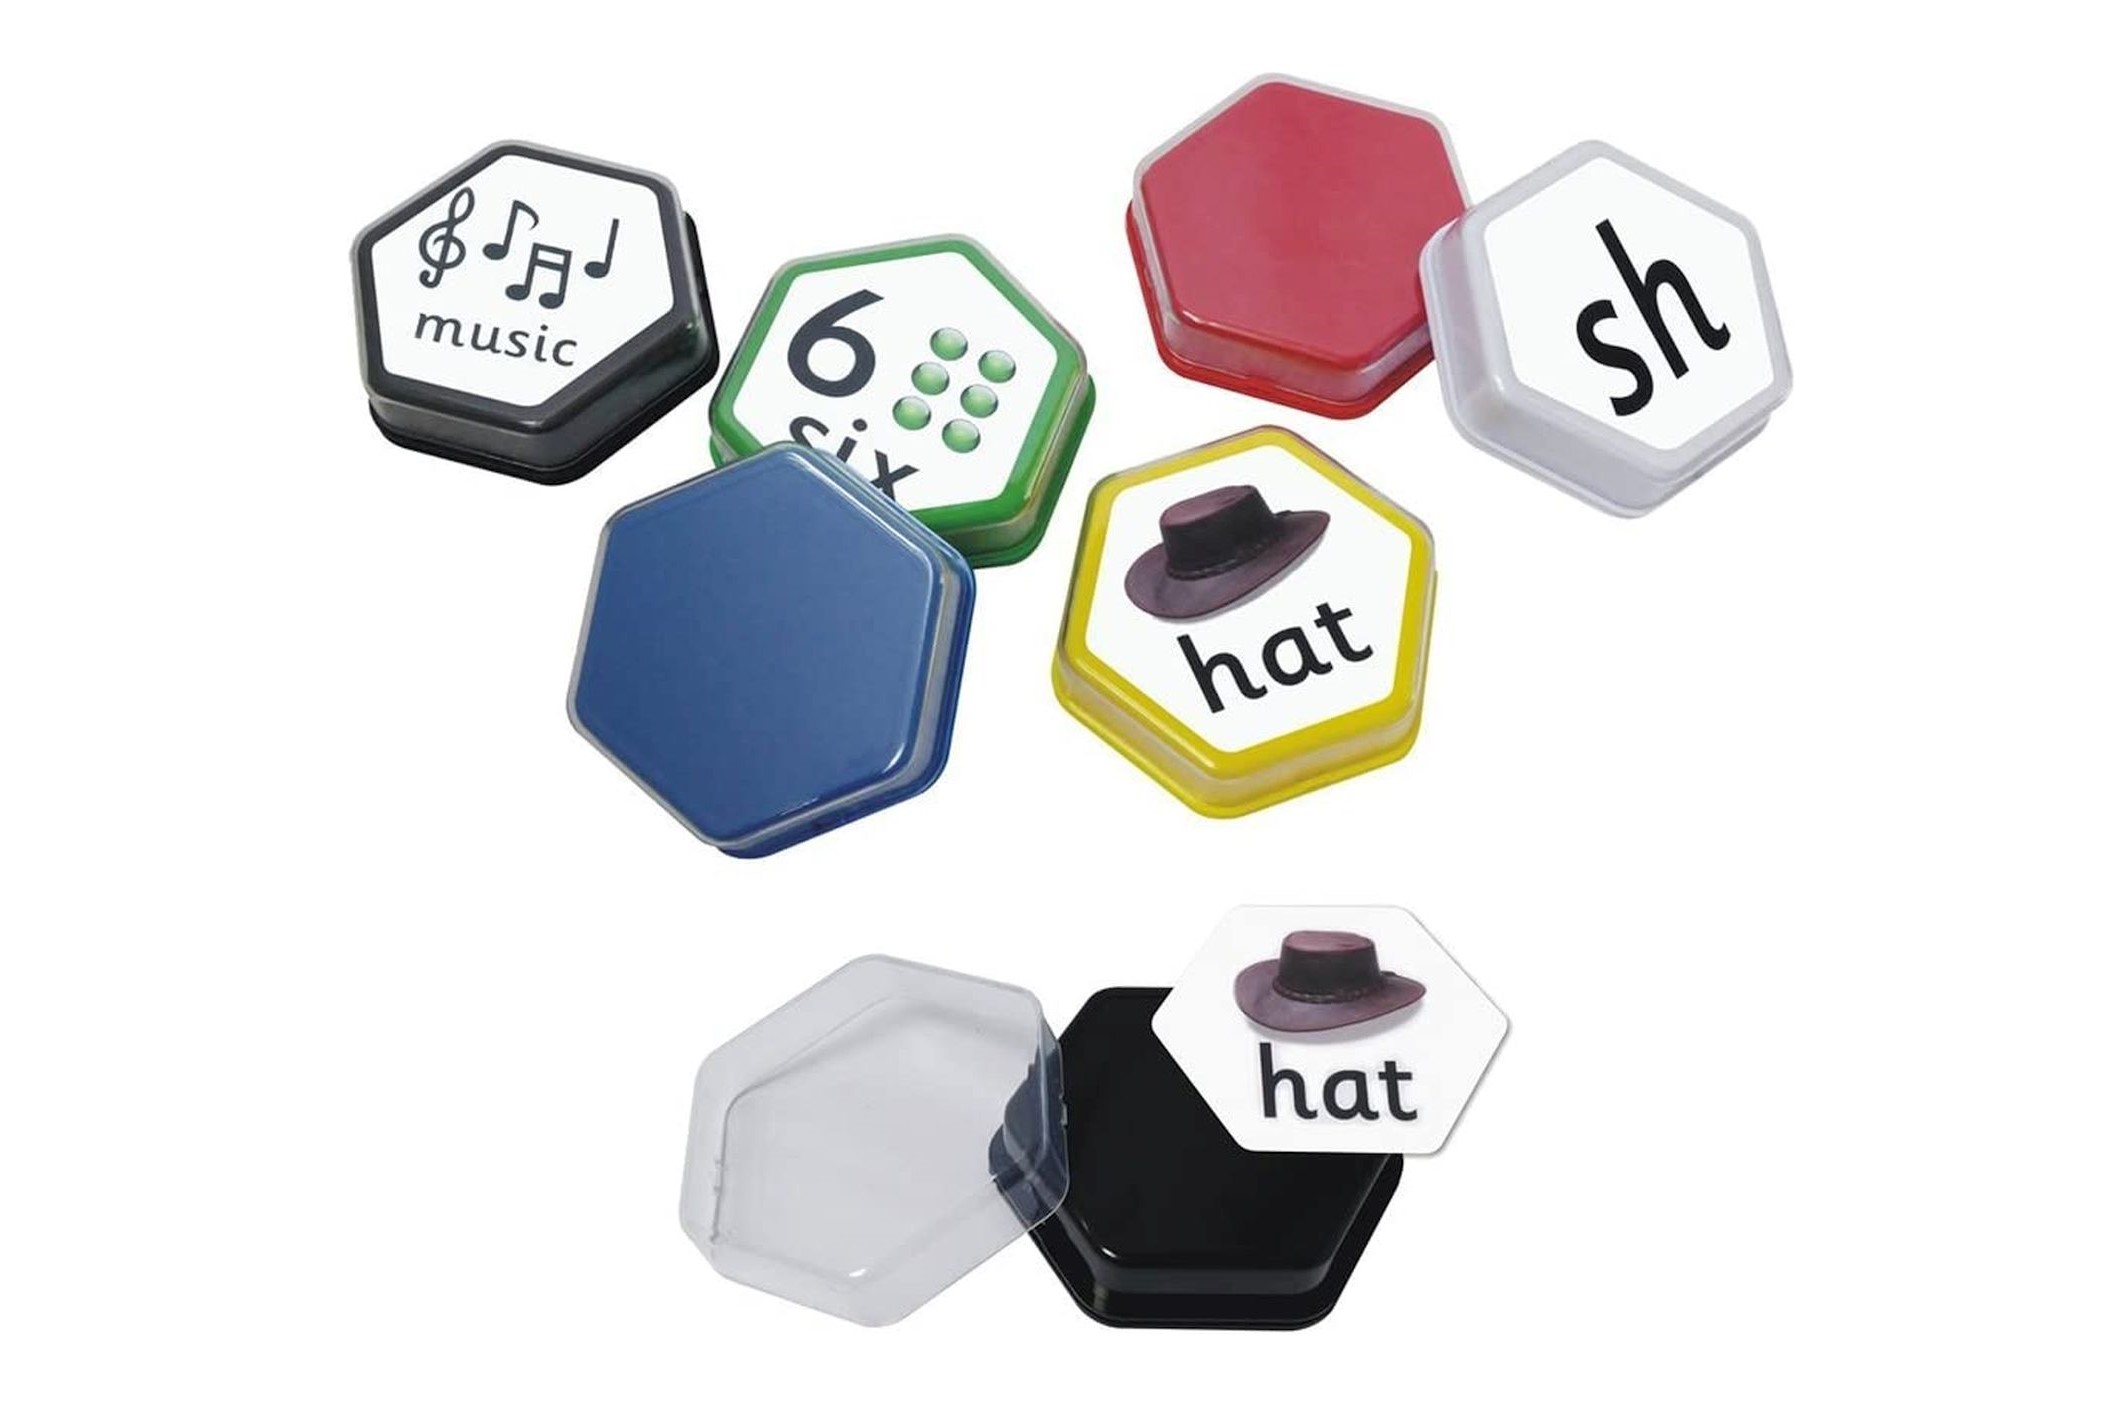 Hexagon-shaped talking tiles in 6 various colours of black, blue, green, yellow, red, and white, with some labelled with white stickers on top.